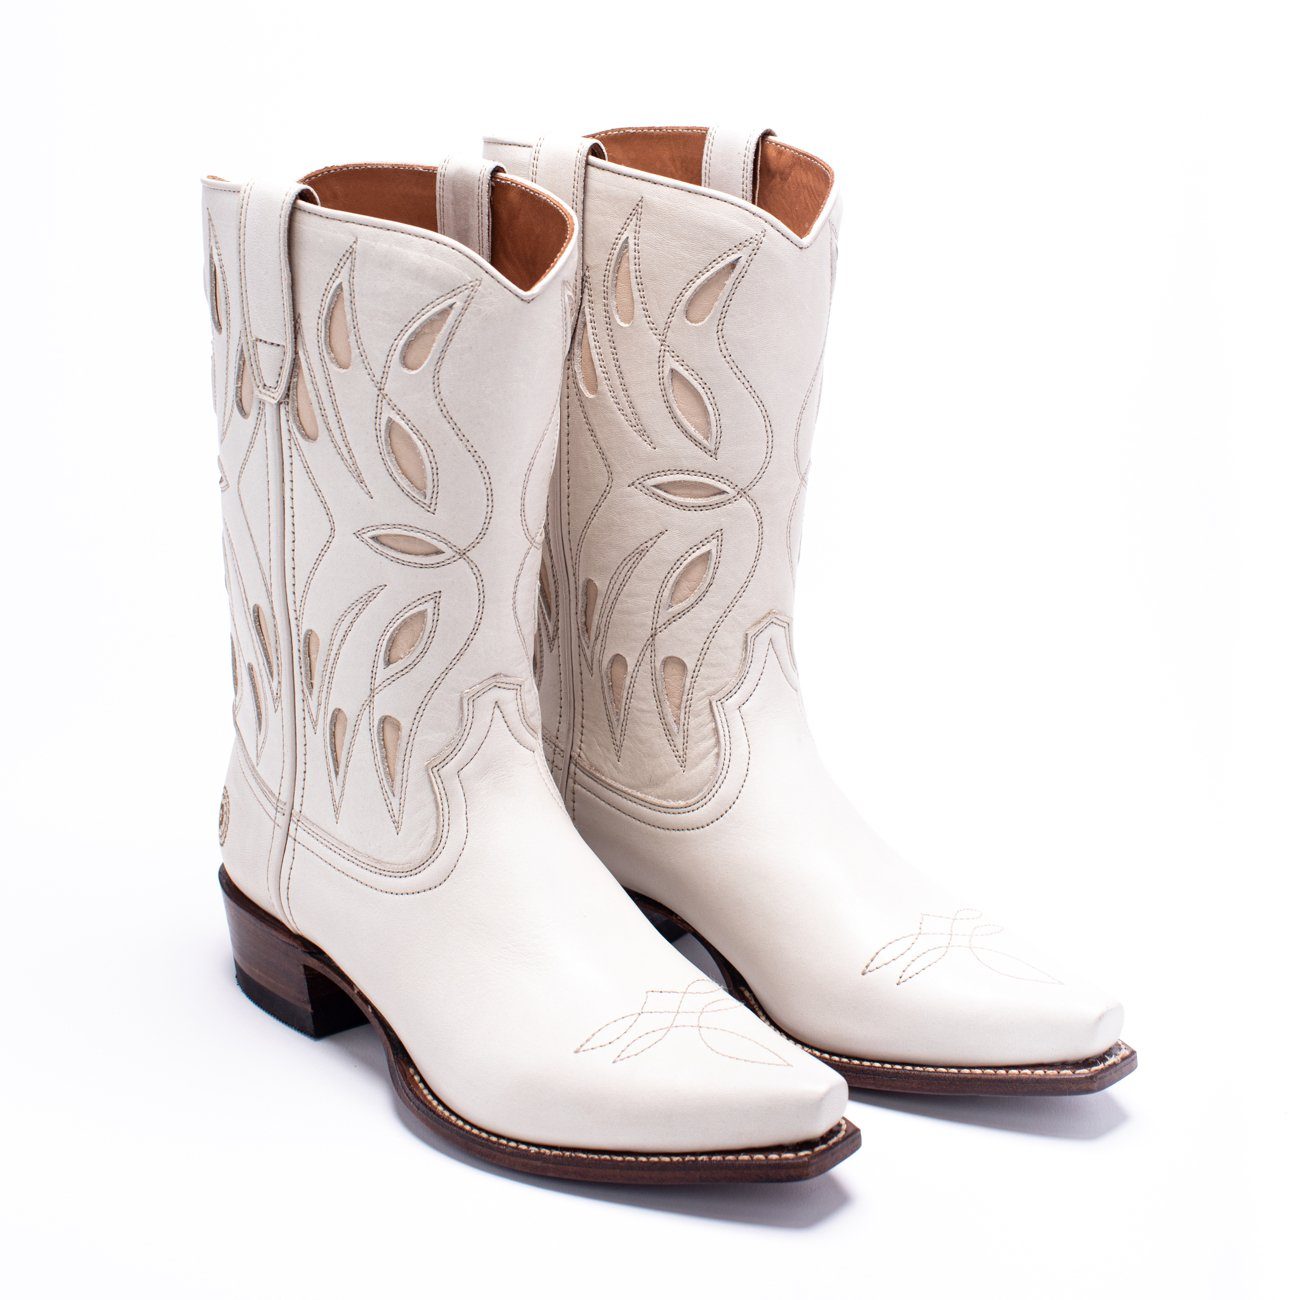 Womens Sagebrush White Leather Cowboy Boot - Ranch Road Boots™ Pair